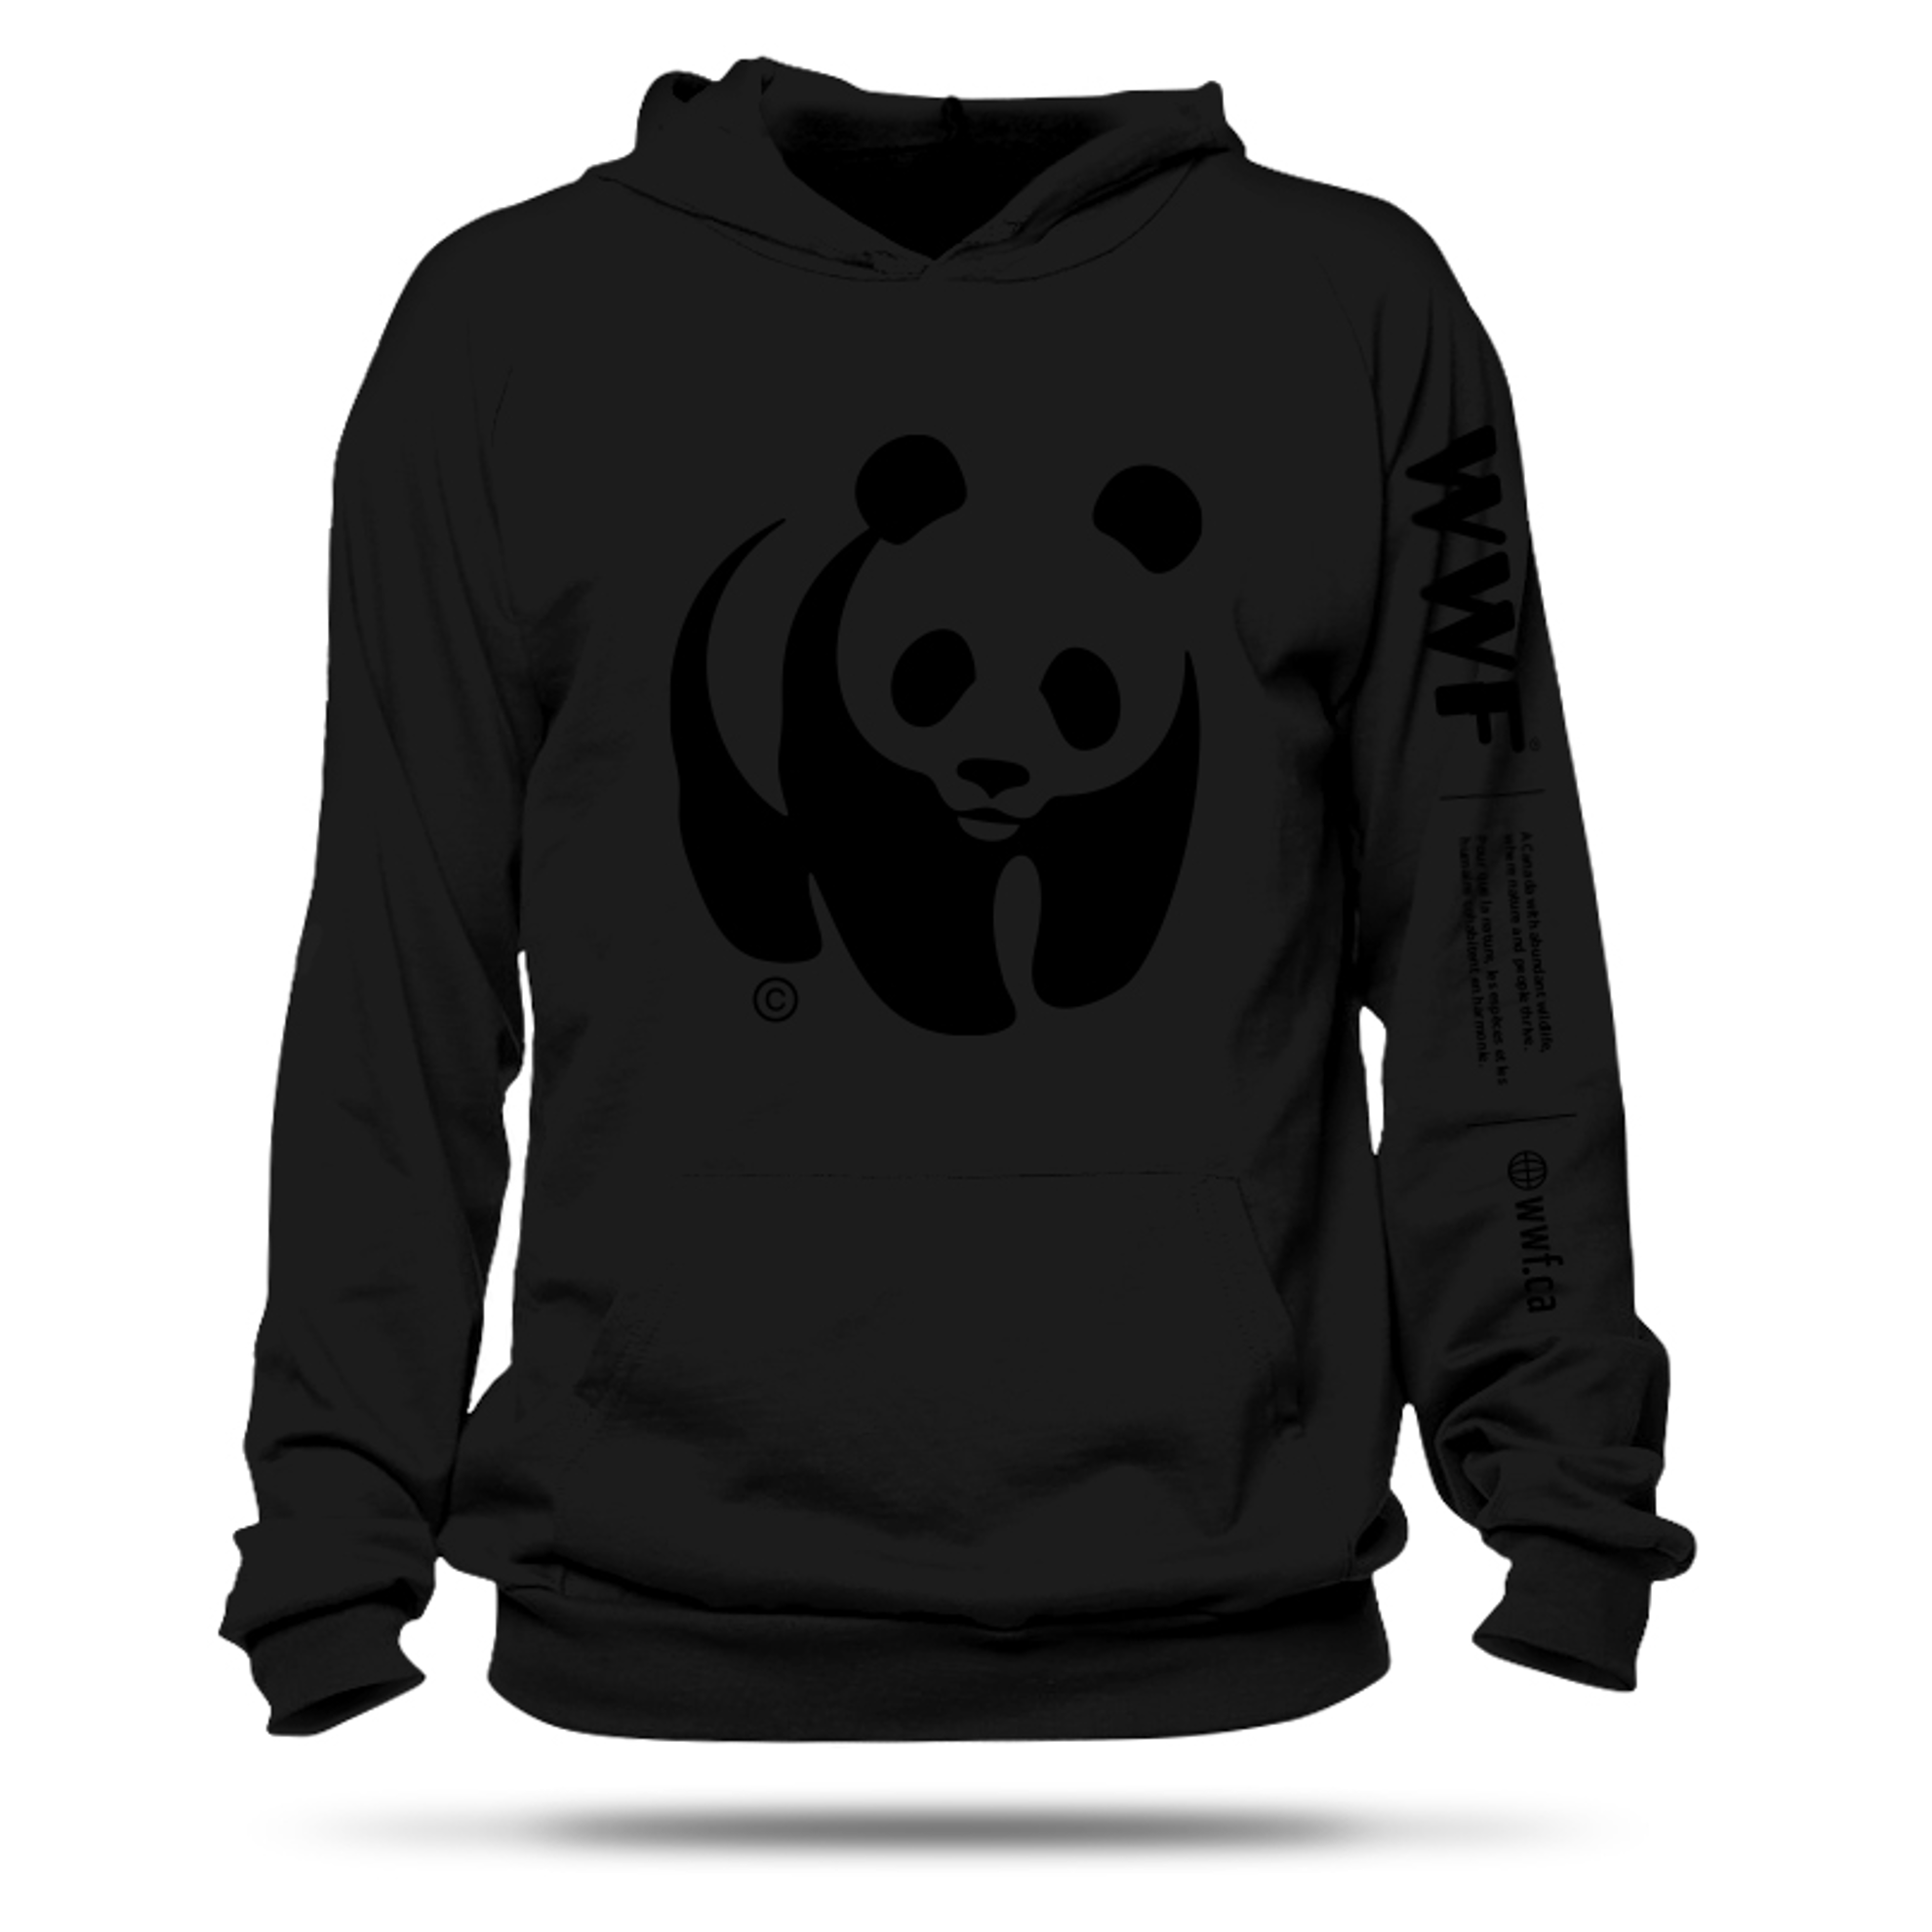 Unisex Black Hooded Sweatshirt with WWF Panda Logo on the Chest and WWF mission statement on the left sleeve